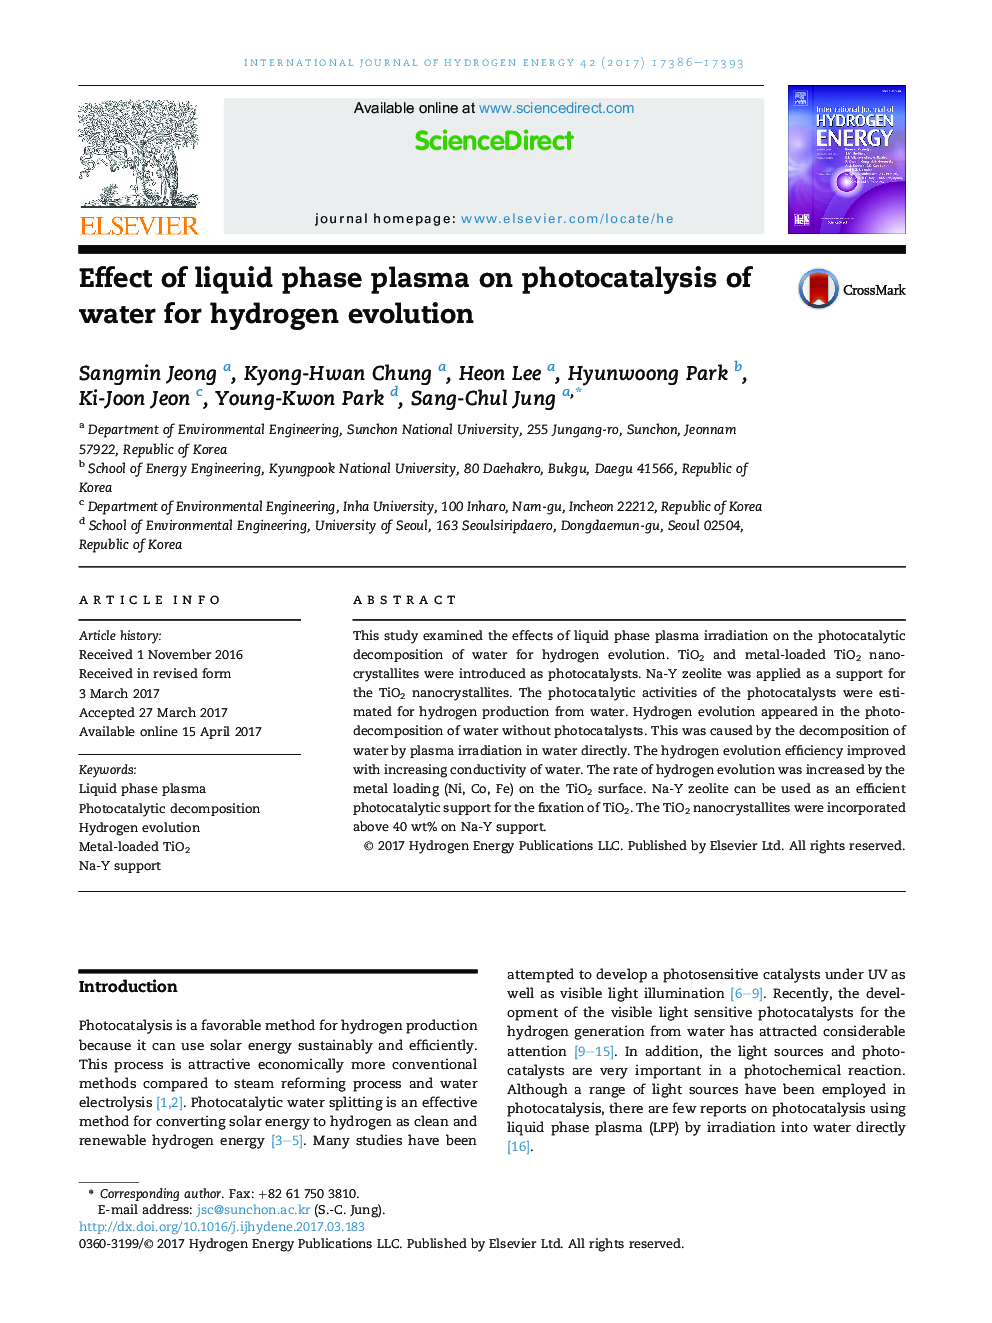 Effect of liquid phase plasma on photocatalysis of water for hydrogen evolution